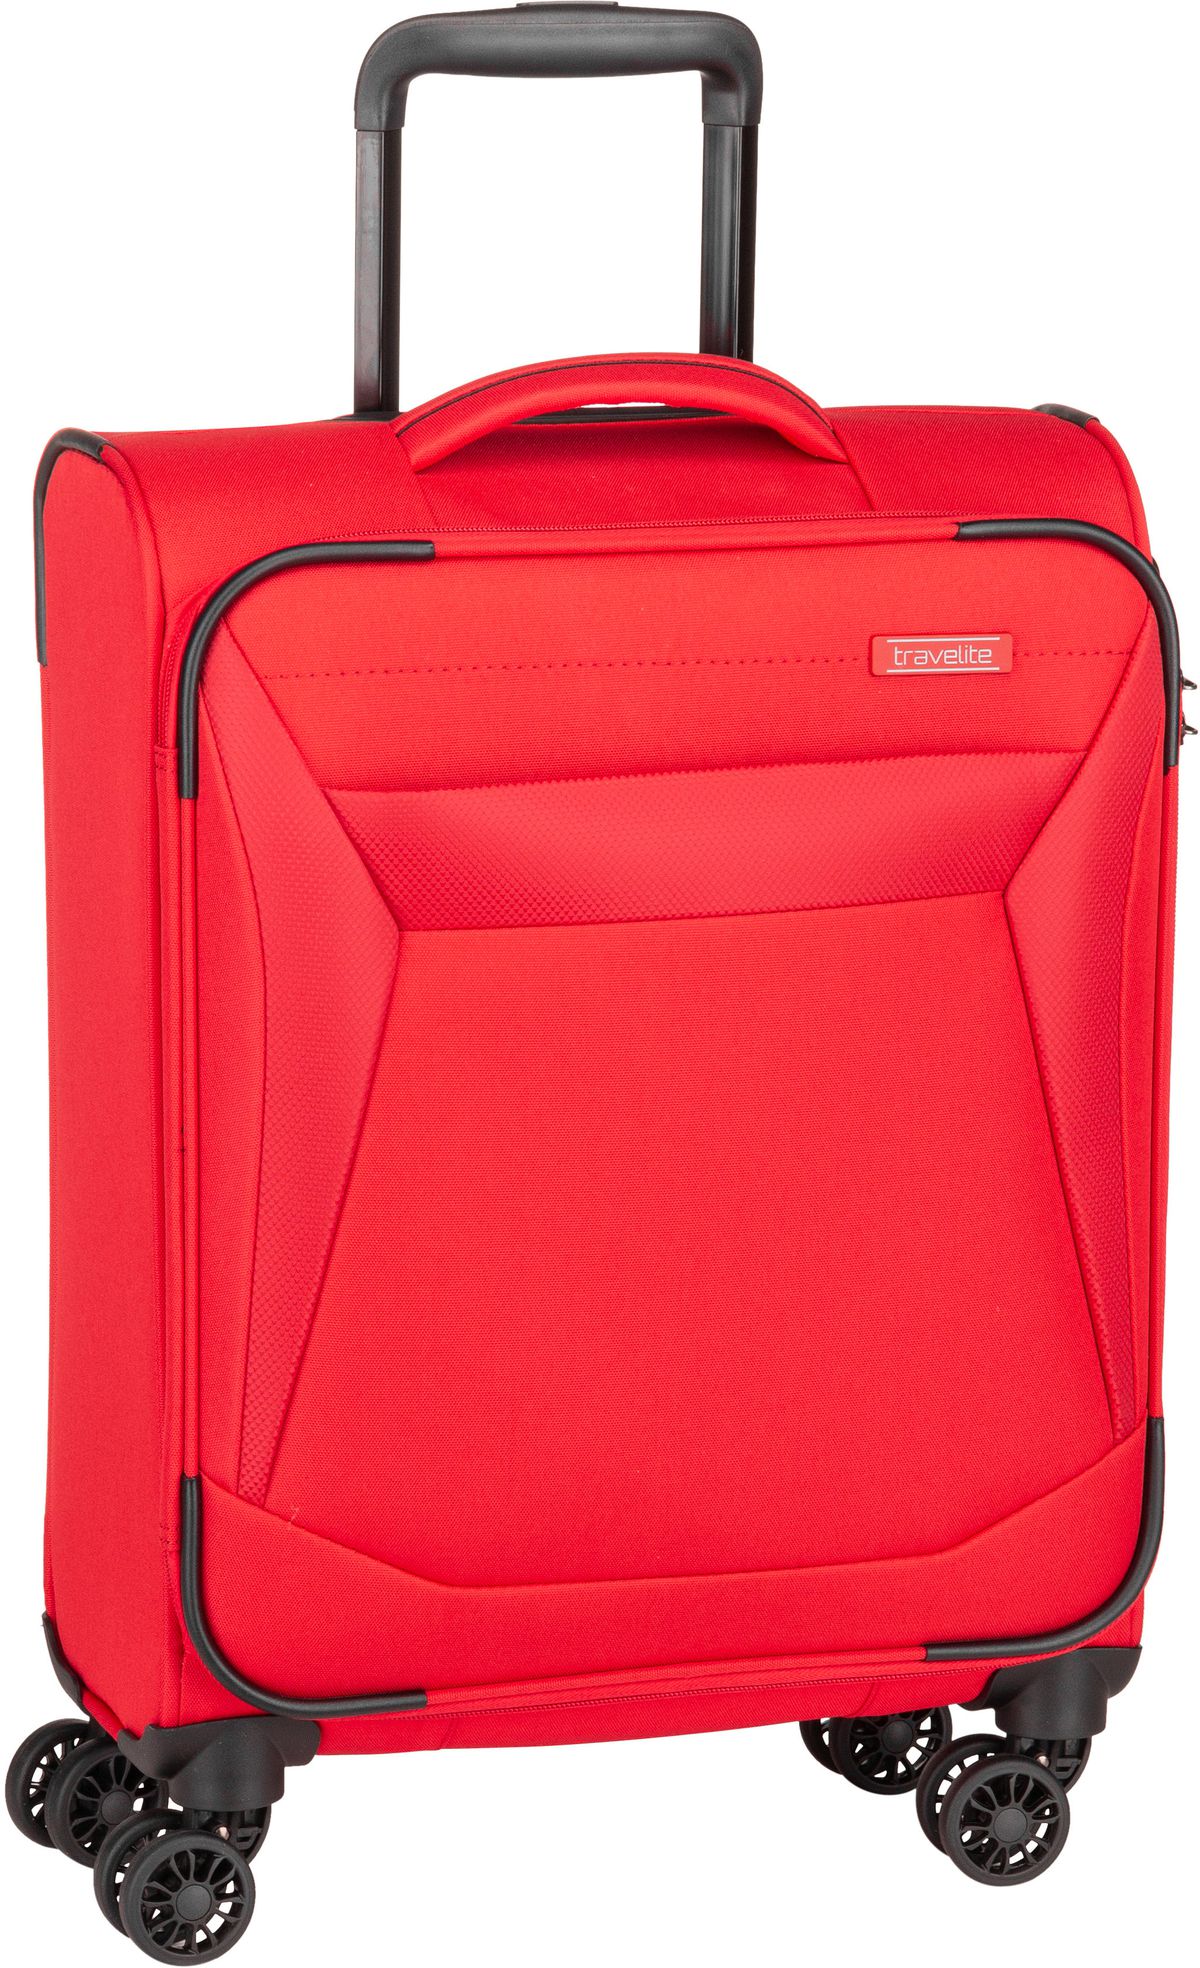 travelite  Chios 4w Trolley S - Koffer mit 4 Rollen - Rot (Rot)